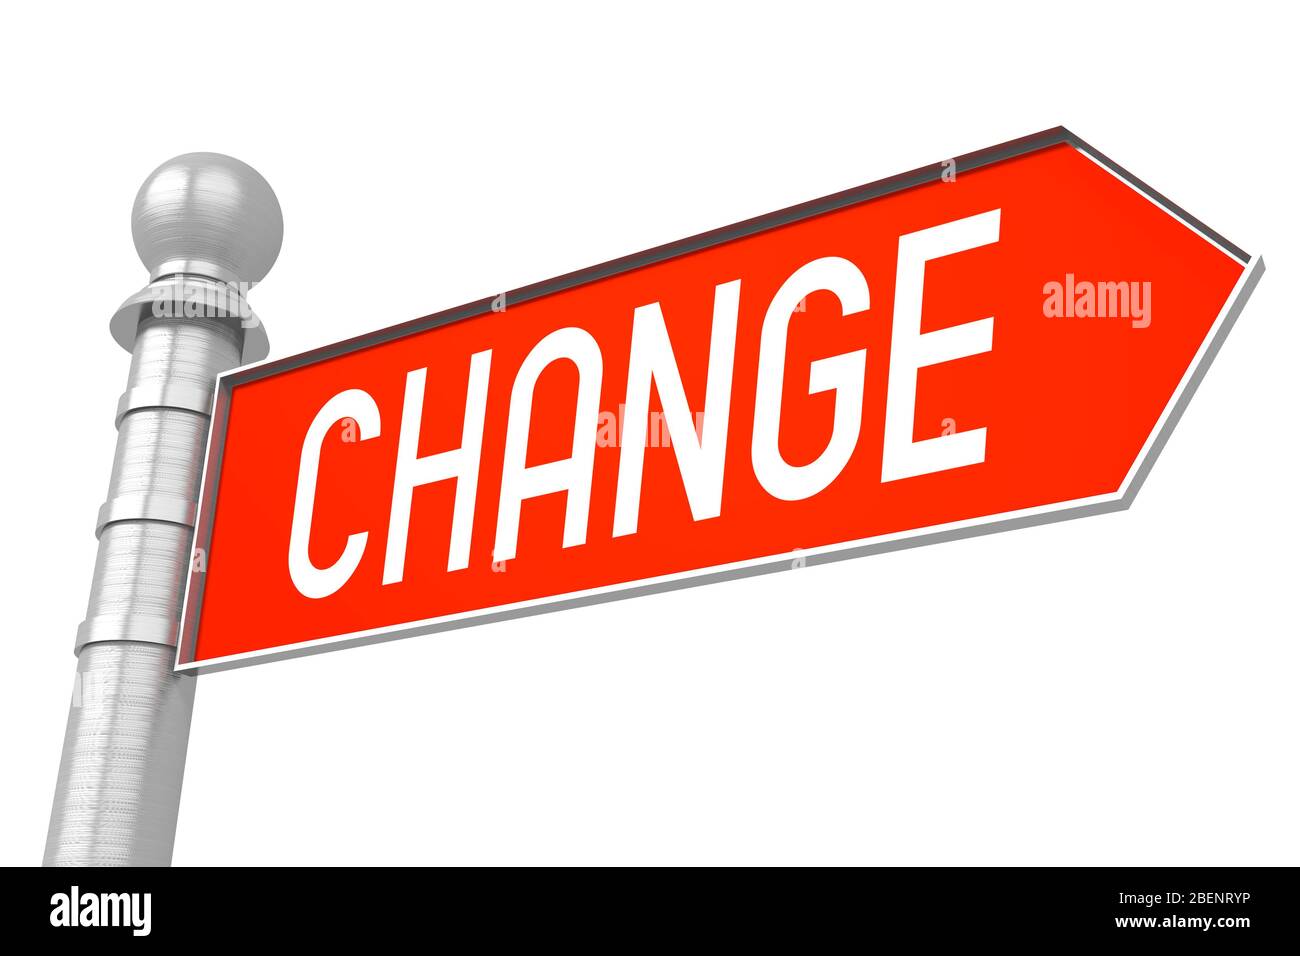 Change - red signpost Stock Photo